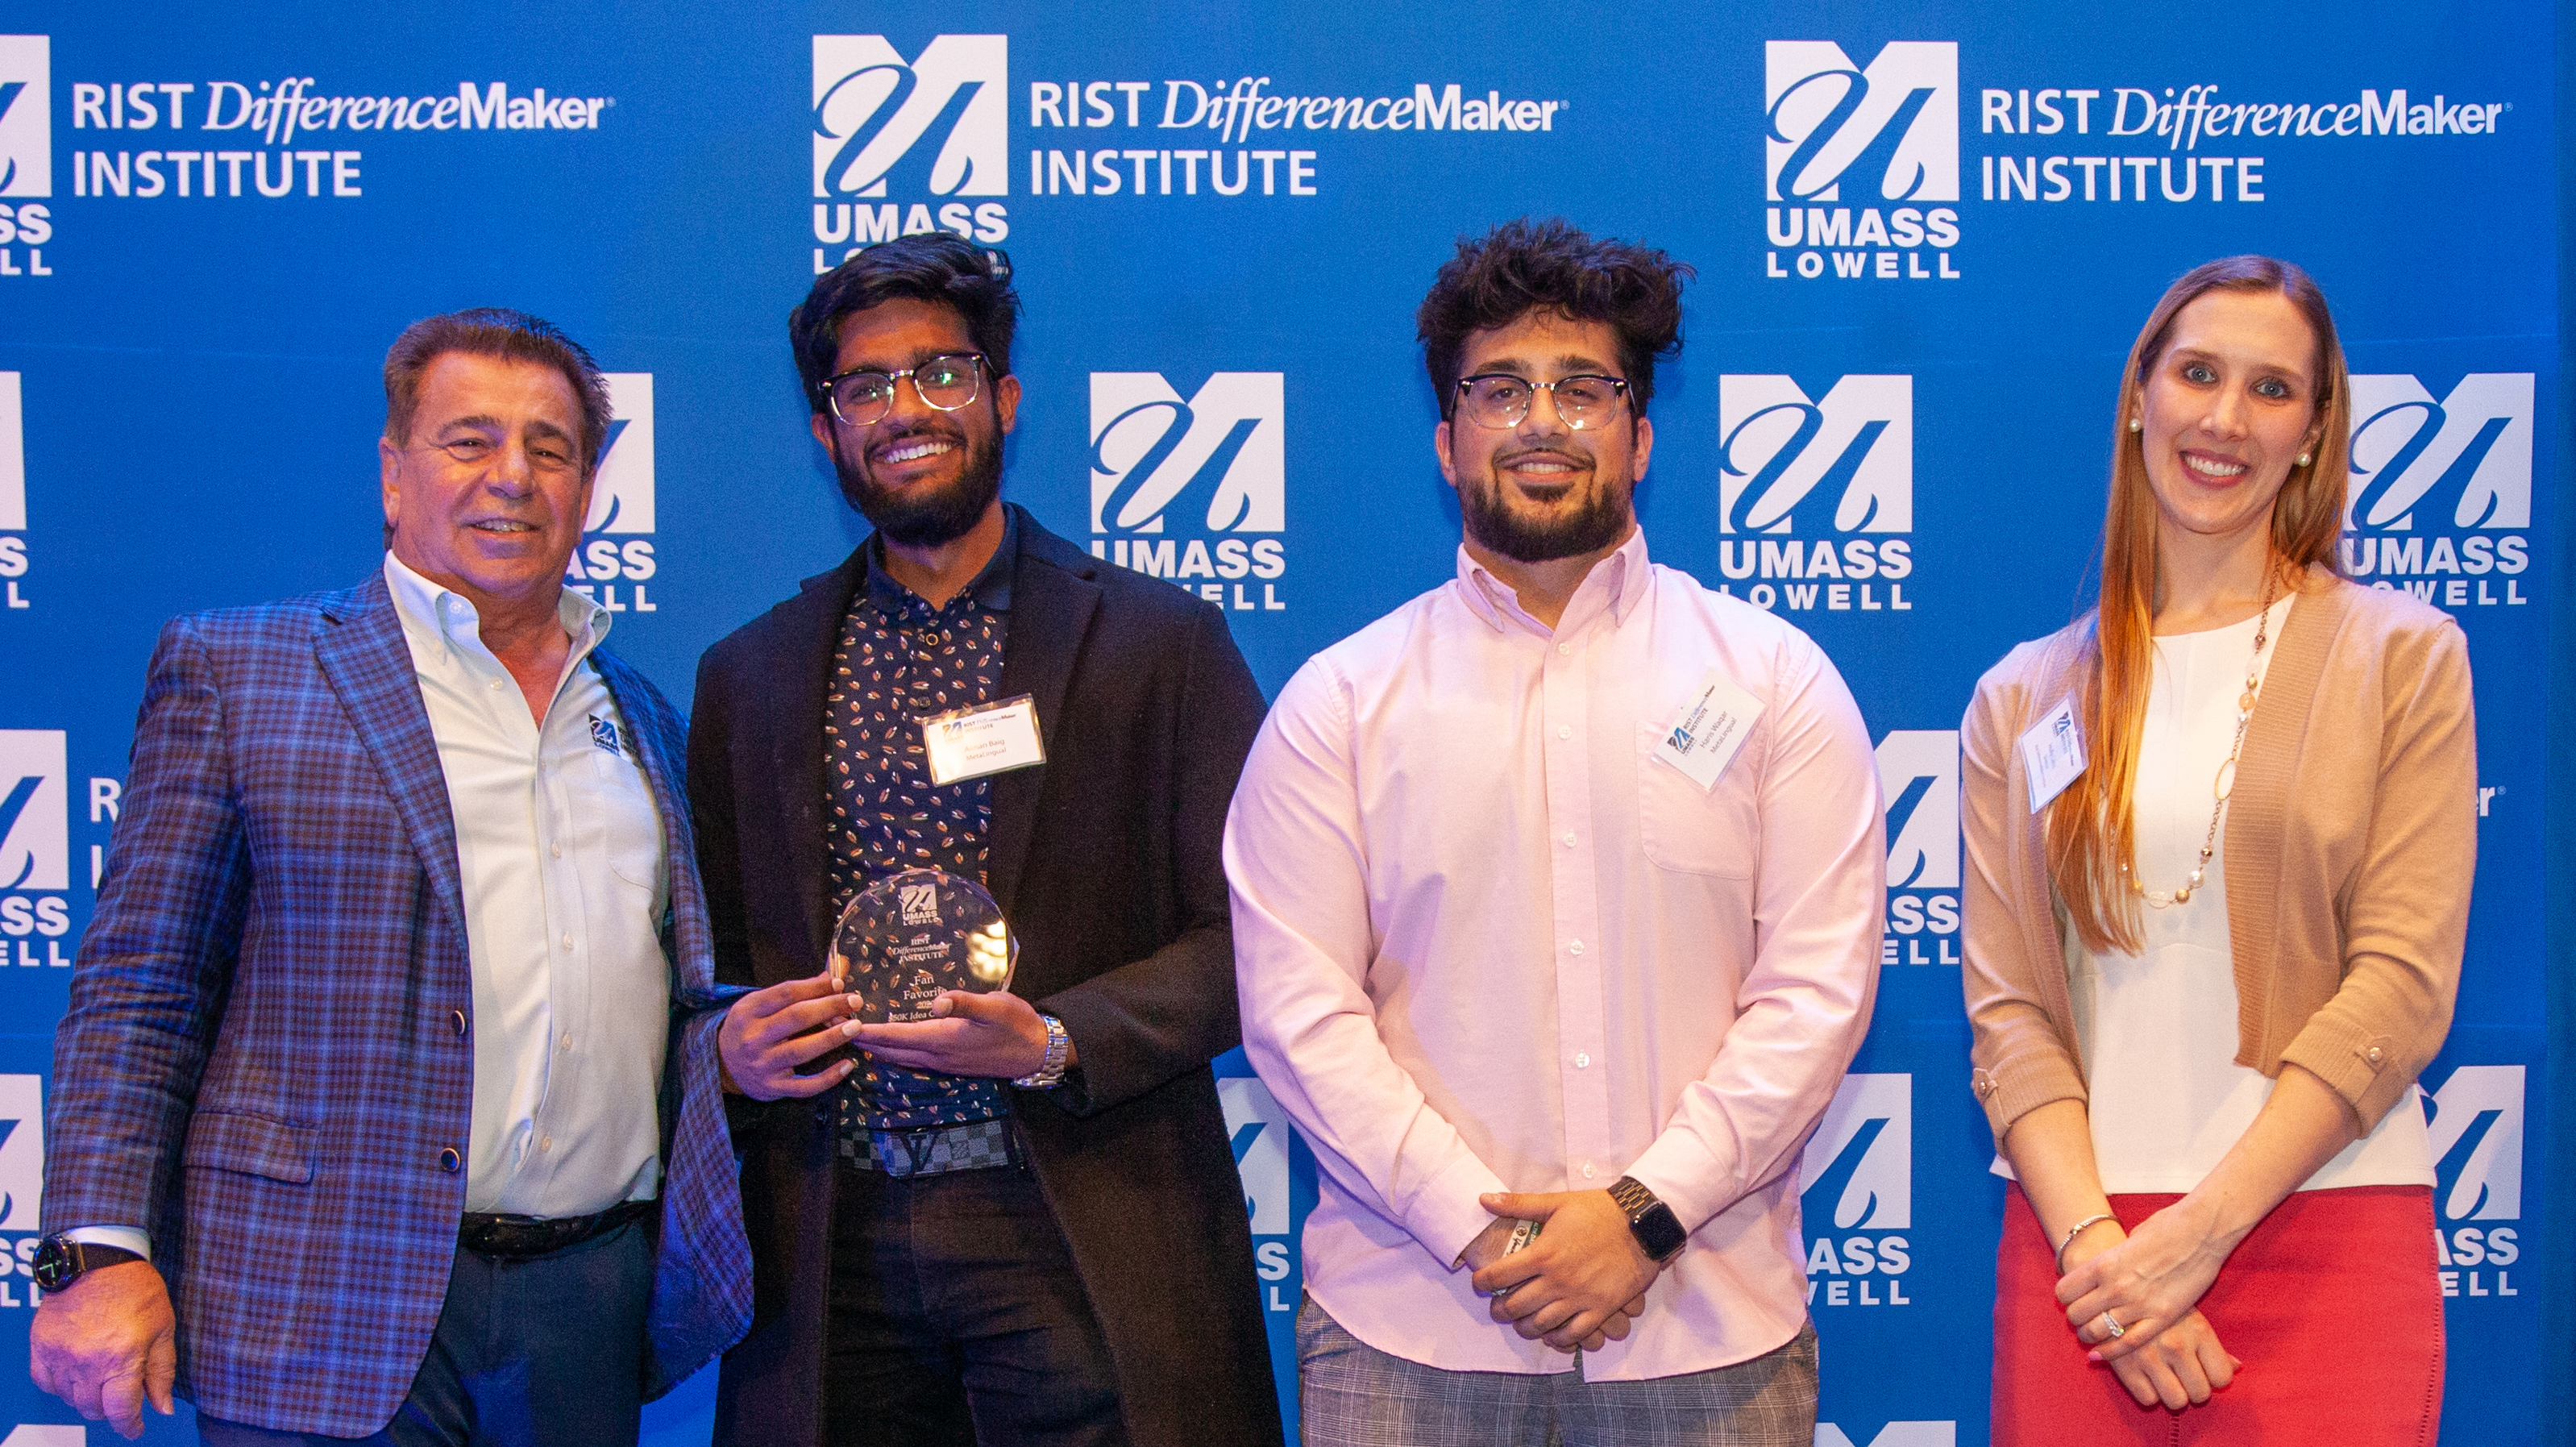 2 male students from the MetaLingual team holding an award and posing with Brian Rist and Holly Lalos from Difference makers against a blue UMass Lowell backdrop.